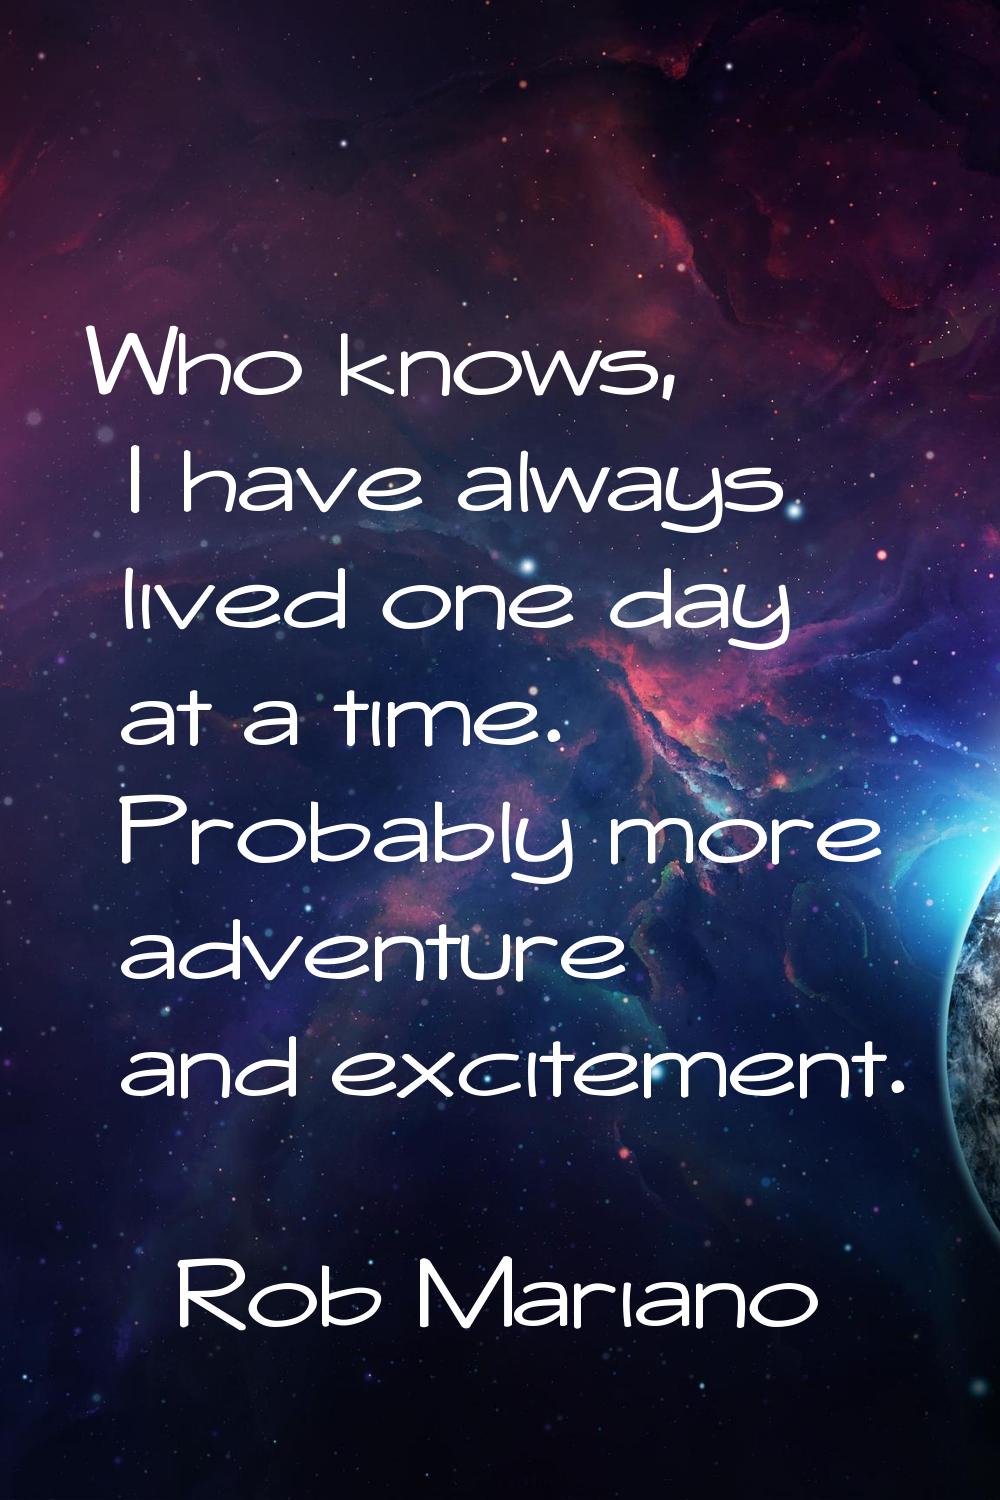 Who knows, I have always lived one day at a time. Probably more adventure and excitement.